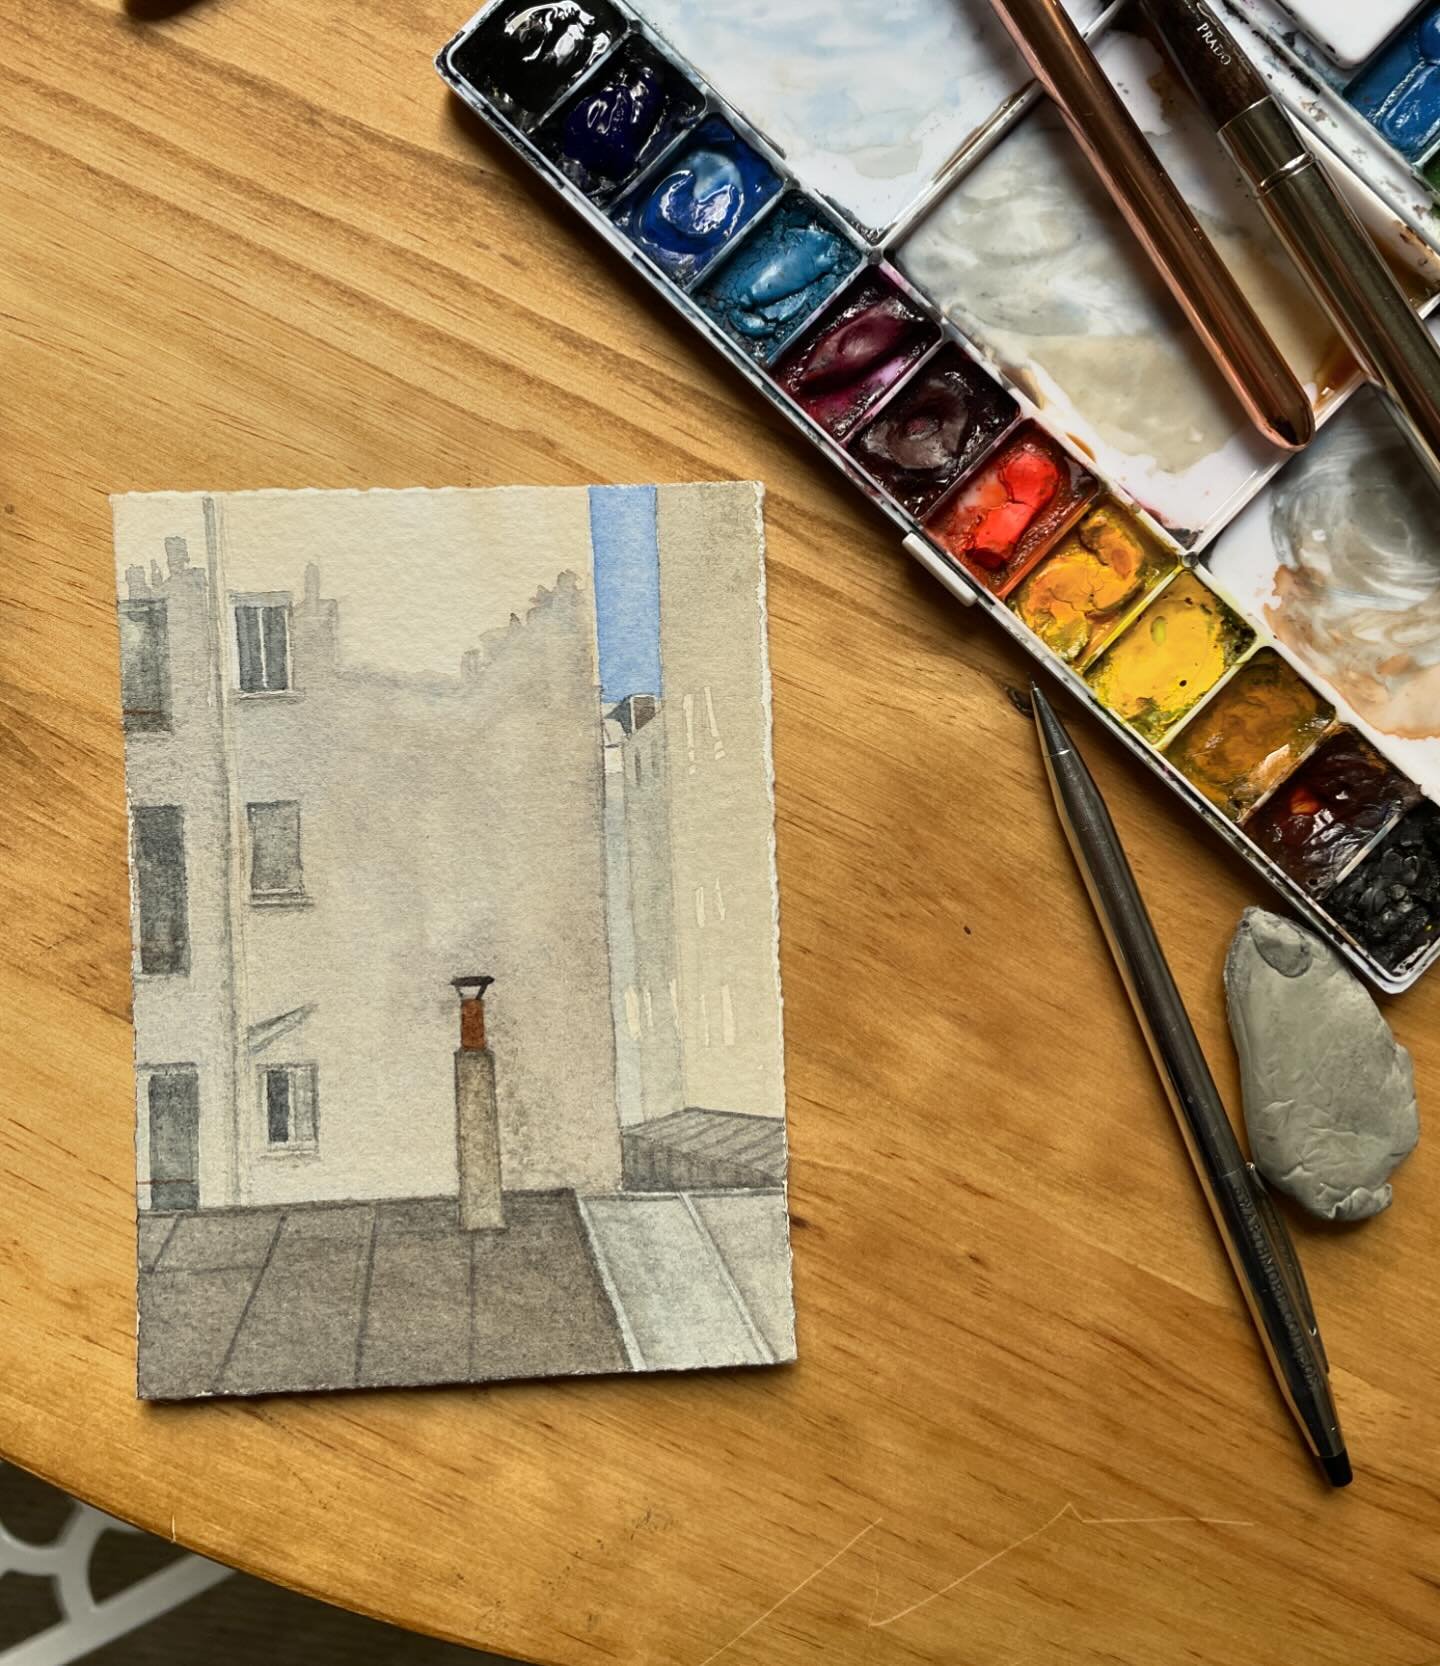 Lil&rsquo; Paris painting - three pigments: cobalt blue, yellow ochre, and burnt sienna. 

#parispainting #watercolorsketch